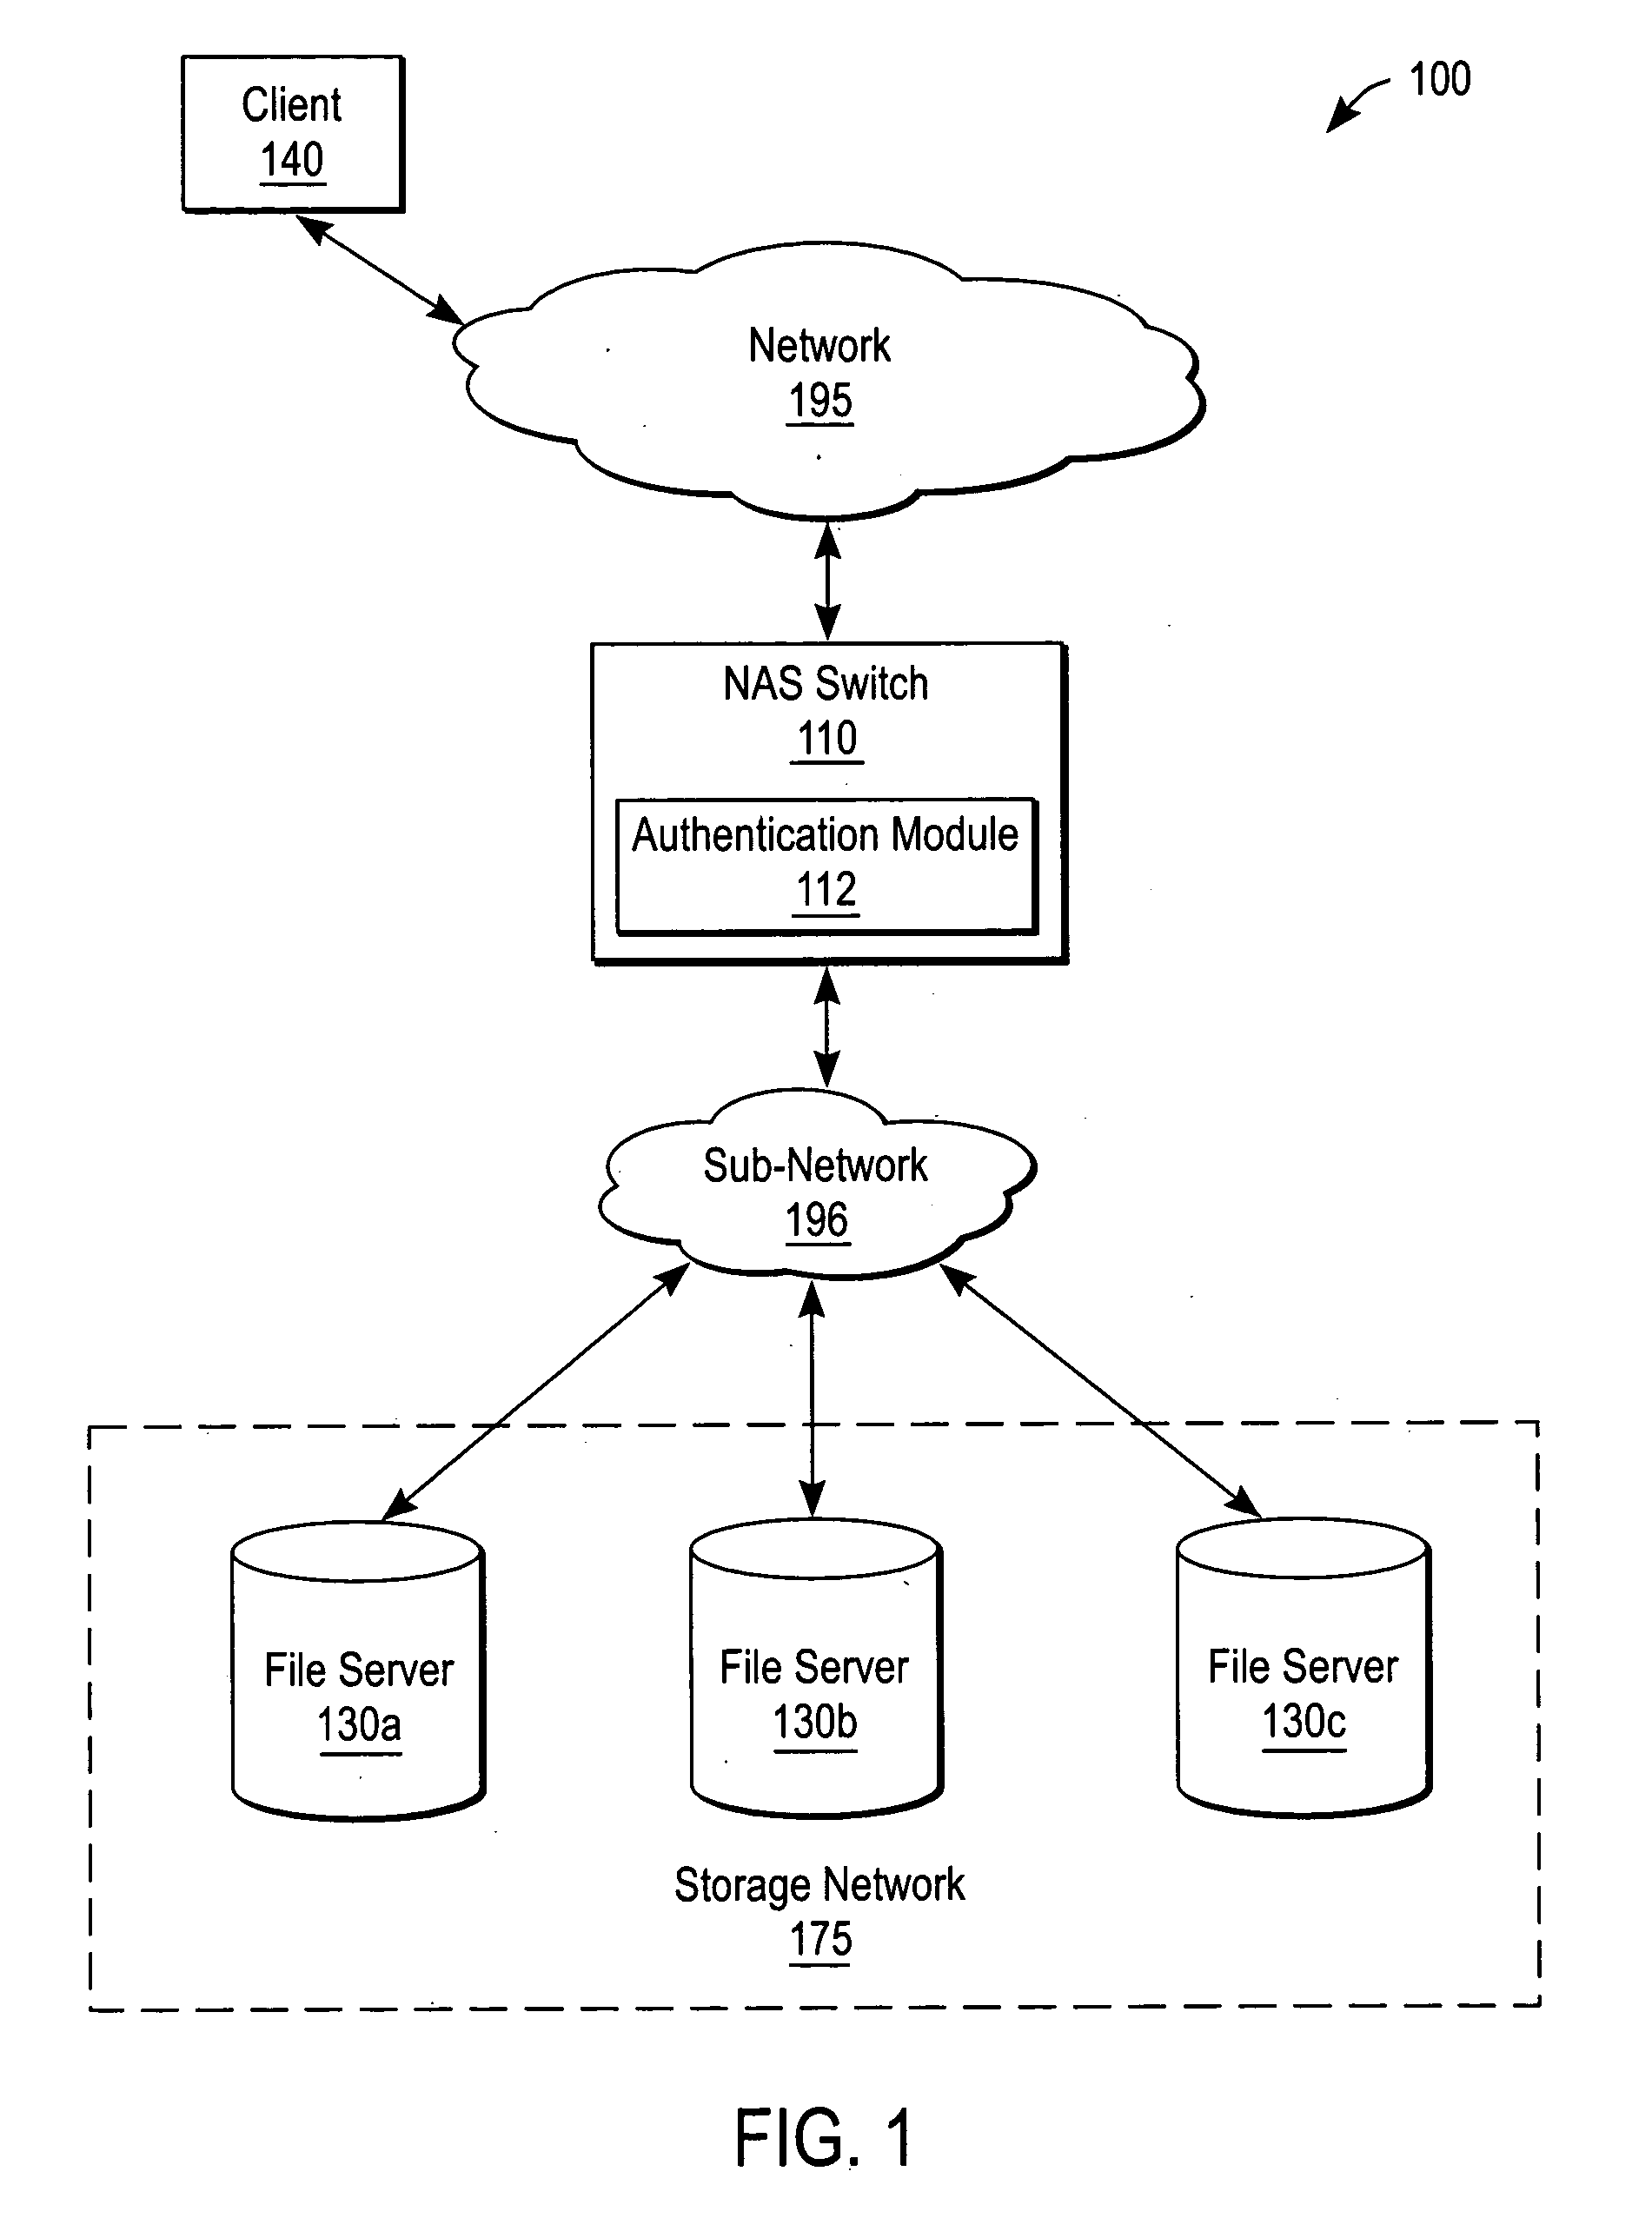 Enabling proxy services using referral mechanisms